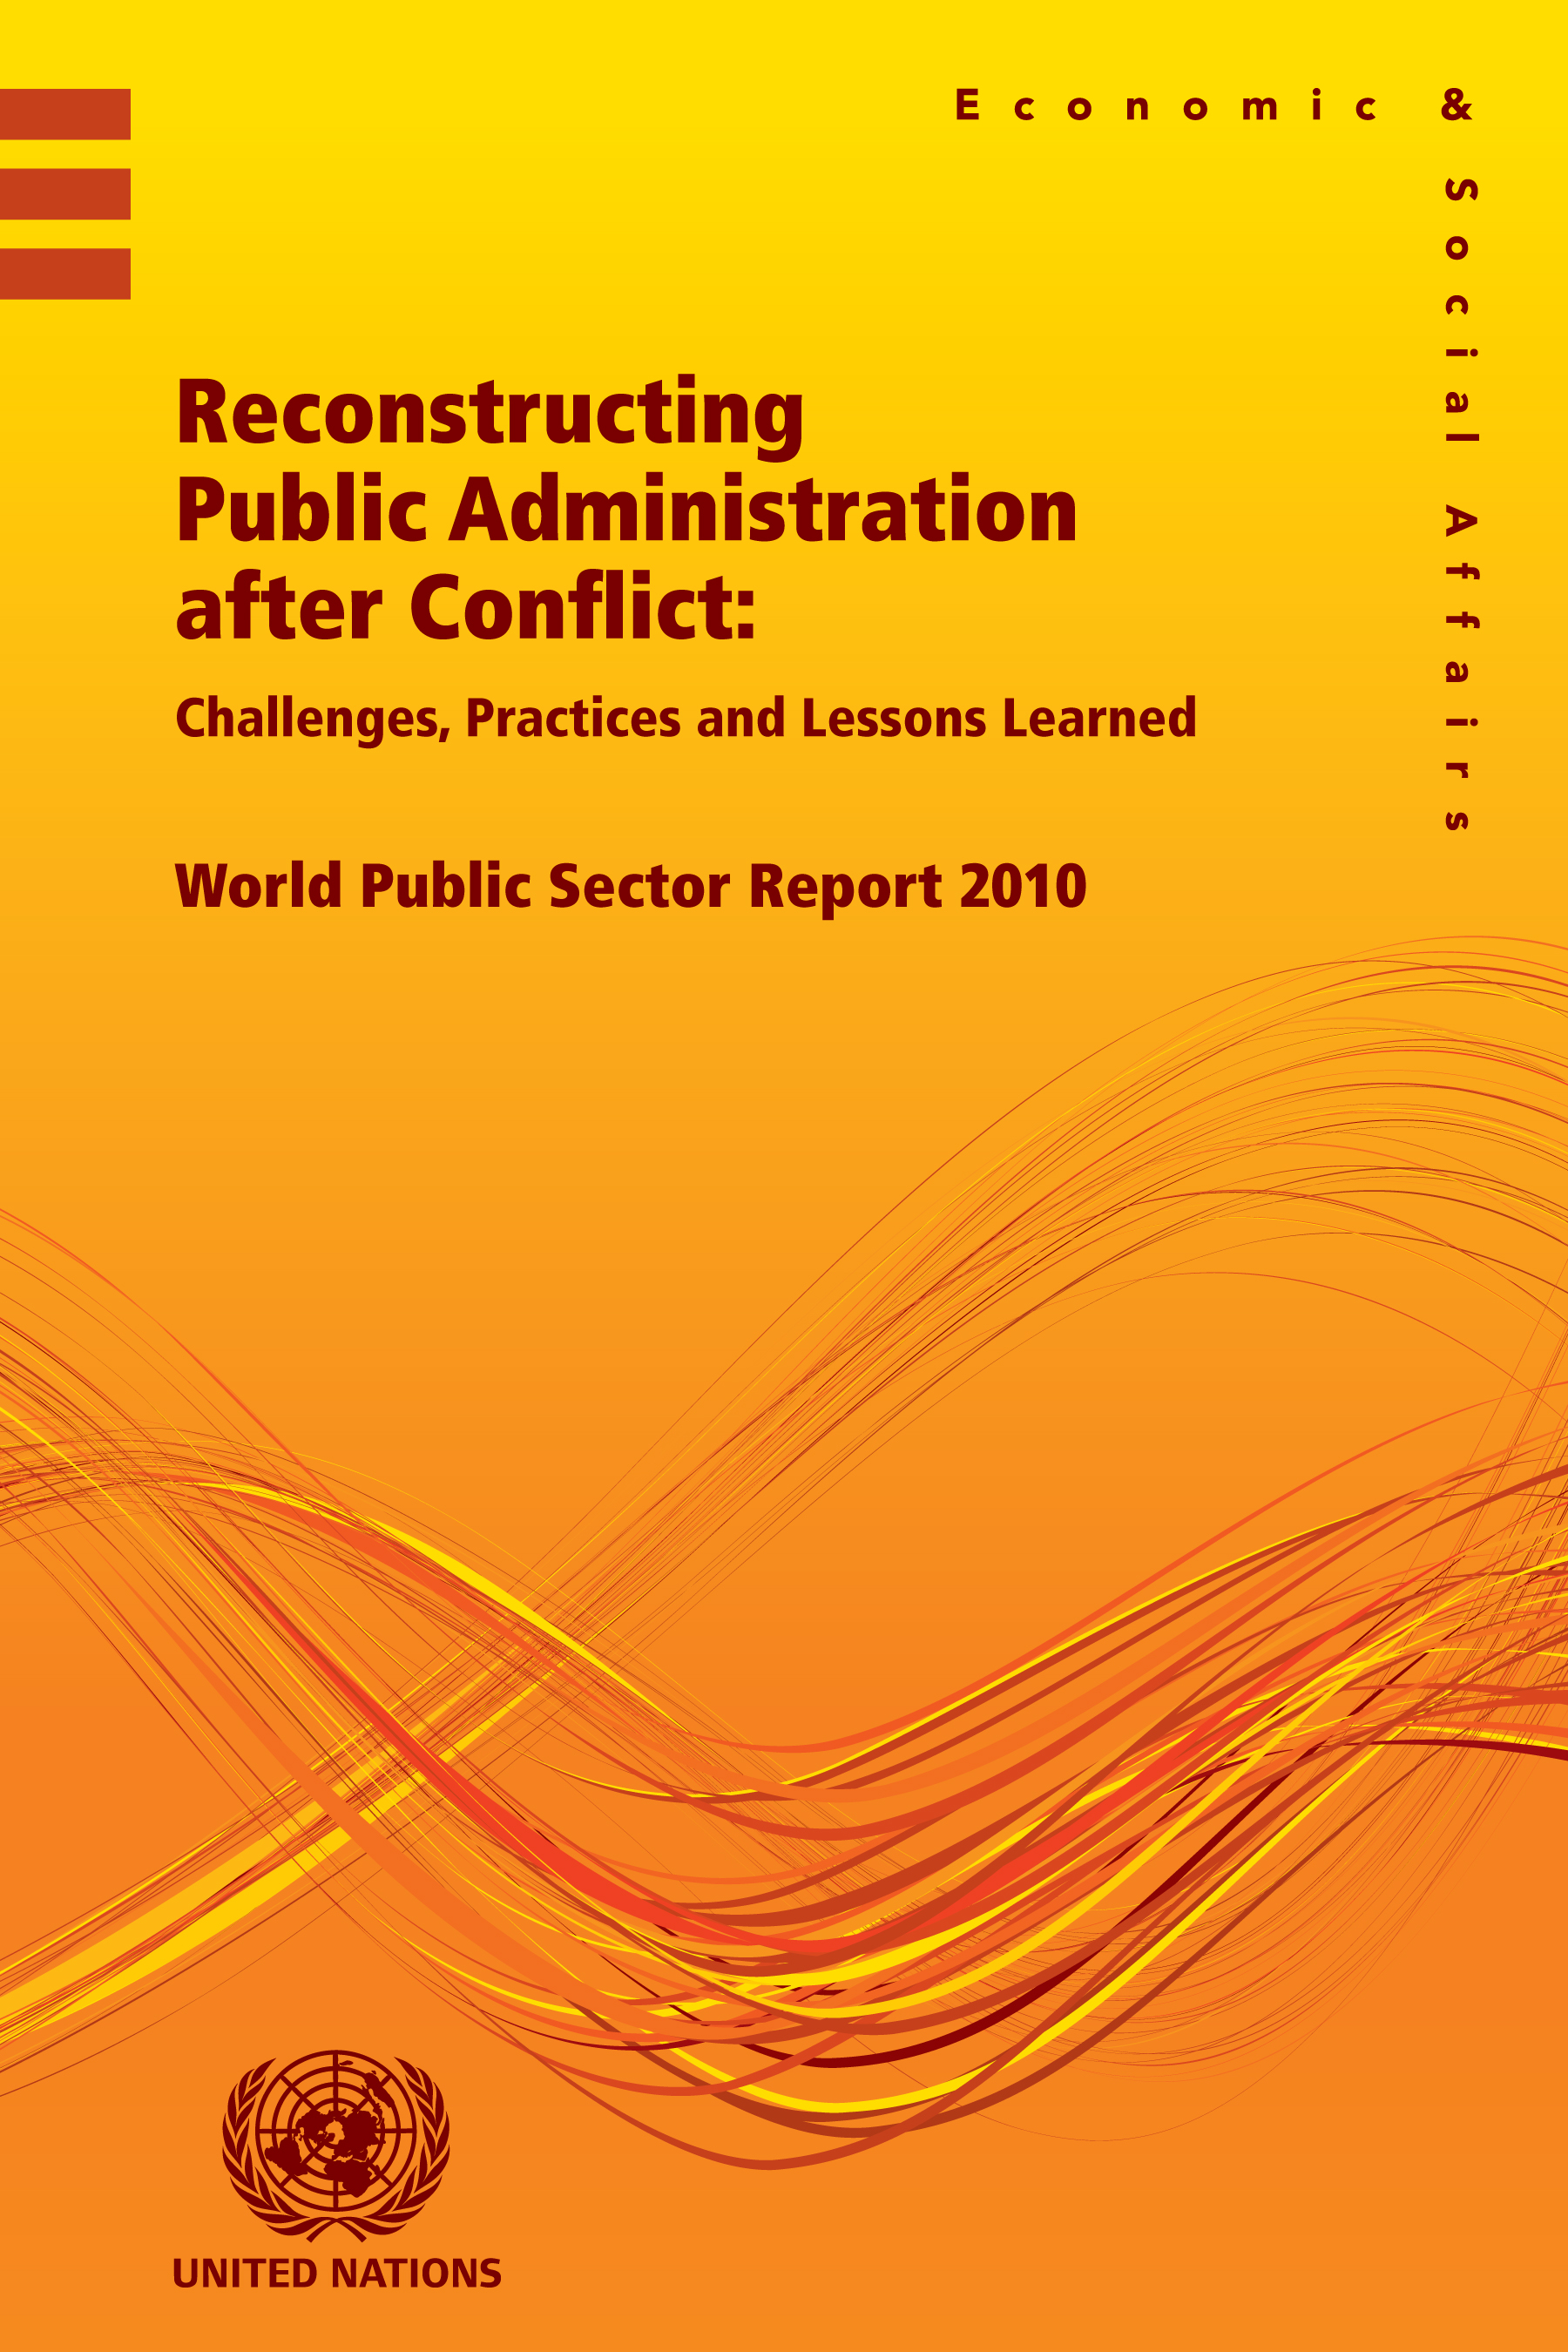 image of World Public Sector Report 2010